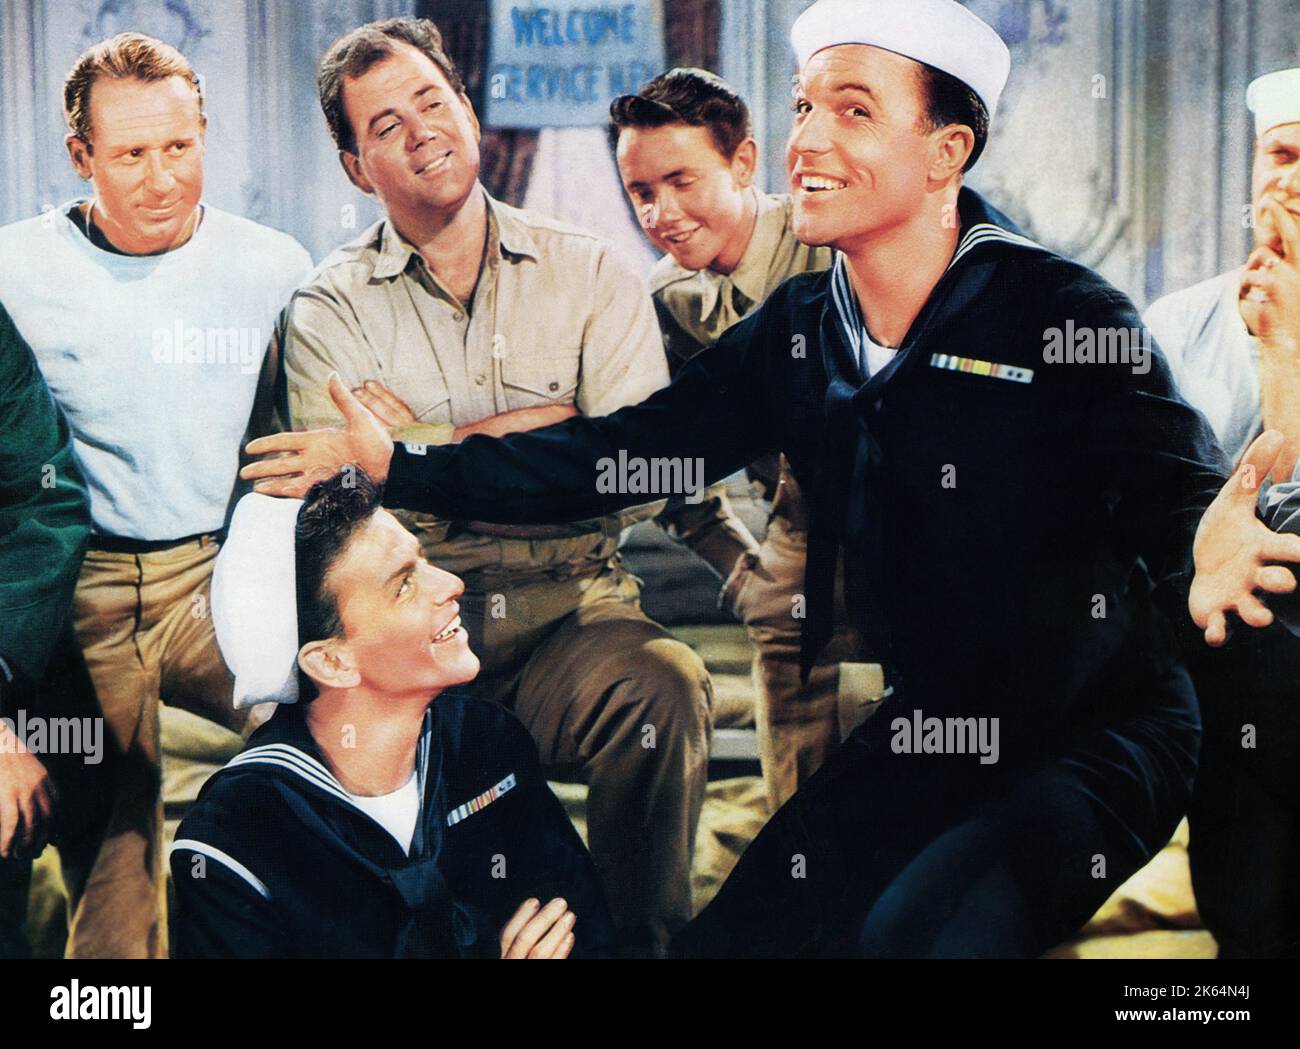 Frank Sinatra, Gene Kelly, on-set of the Film, 'Anchors Aweigh'', MGM, 1945 Stock Photo